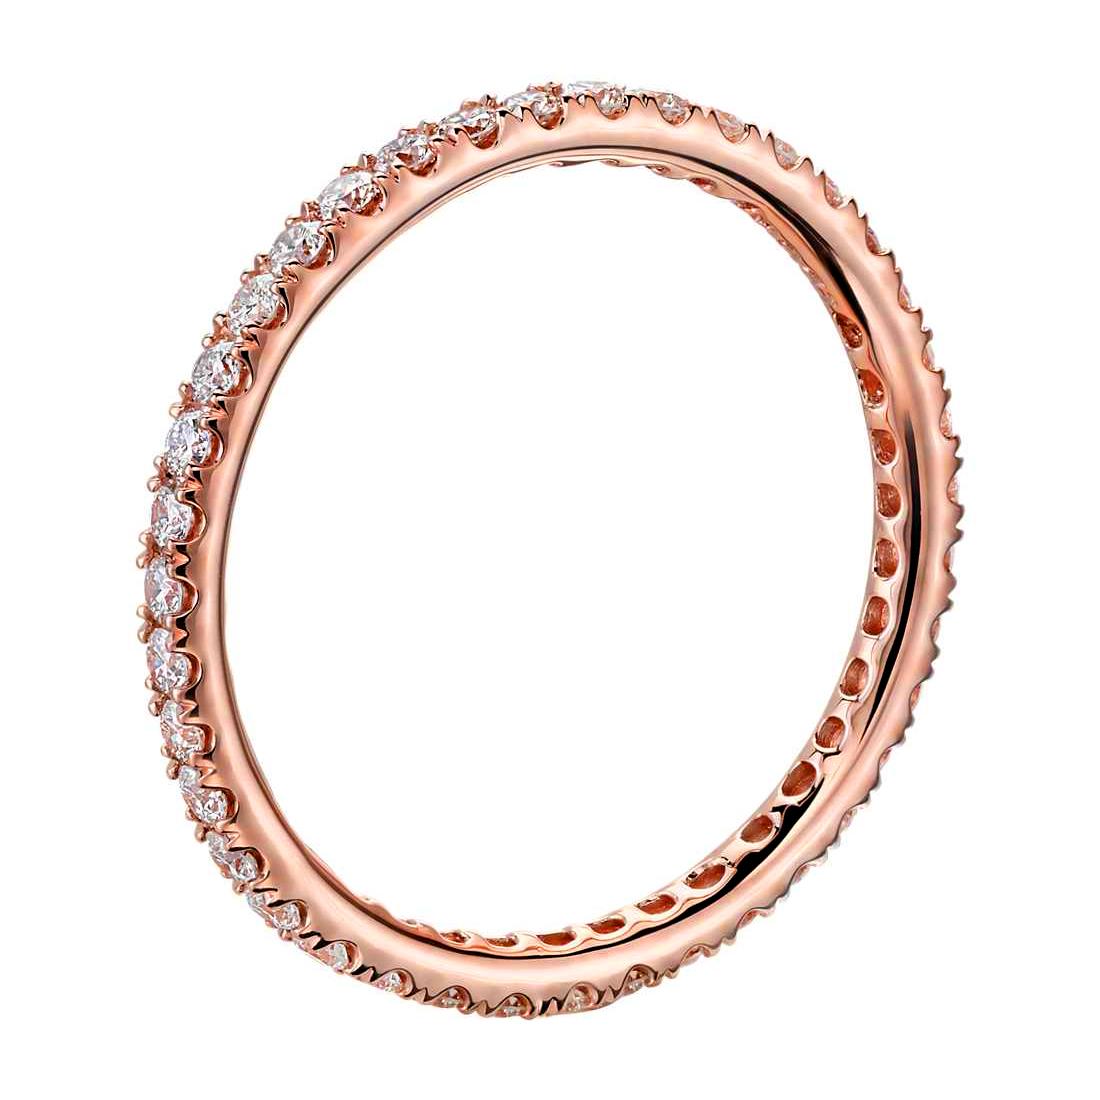 Radiant round-cut diamonds sparkle along the entire band of this wedding band ring, lending dazzle to your reminder of commitment. Designed by Suzy Levian, this 14k rose gold eternity ring features a high polish finish. Adorn your hand or the hand